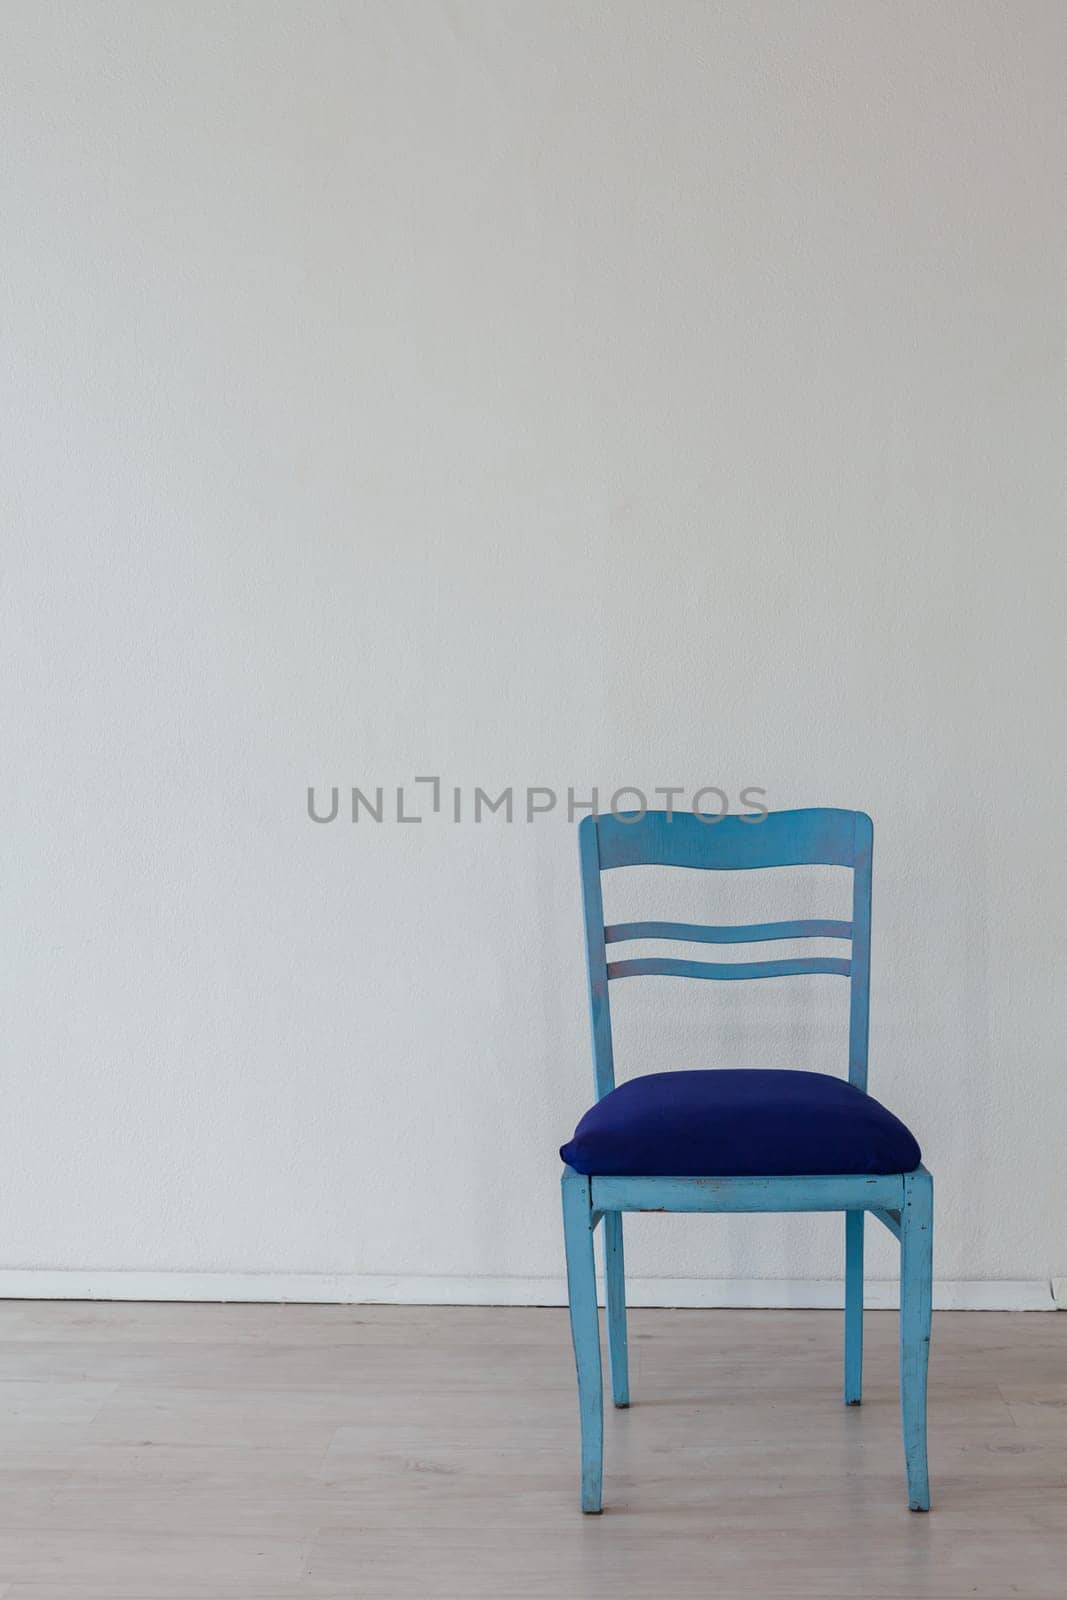 chair in the interior of an empty white room